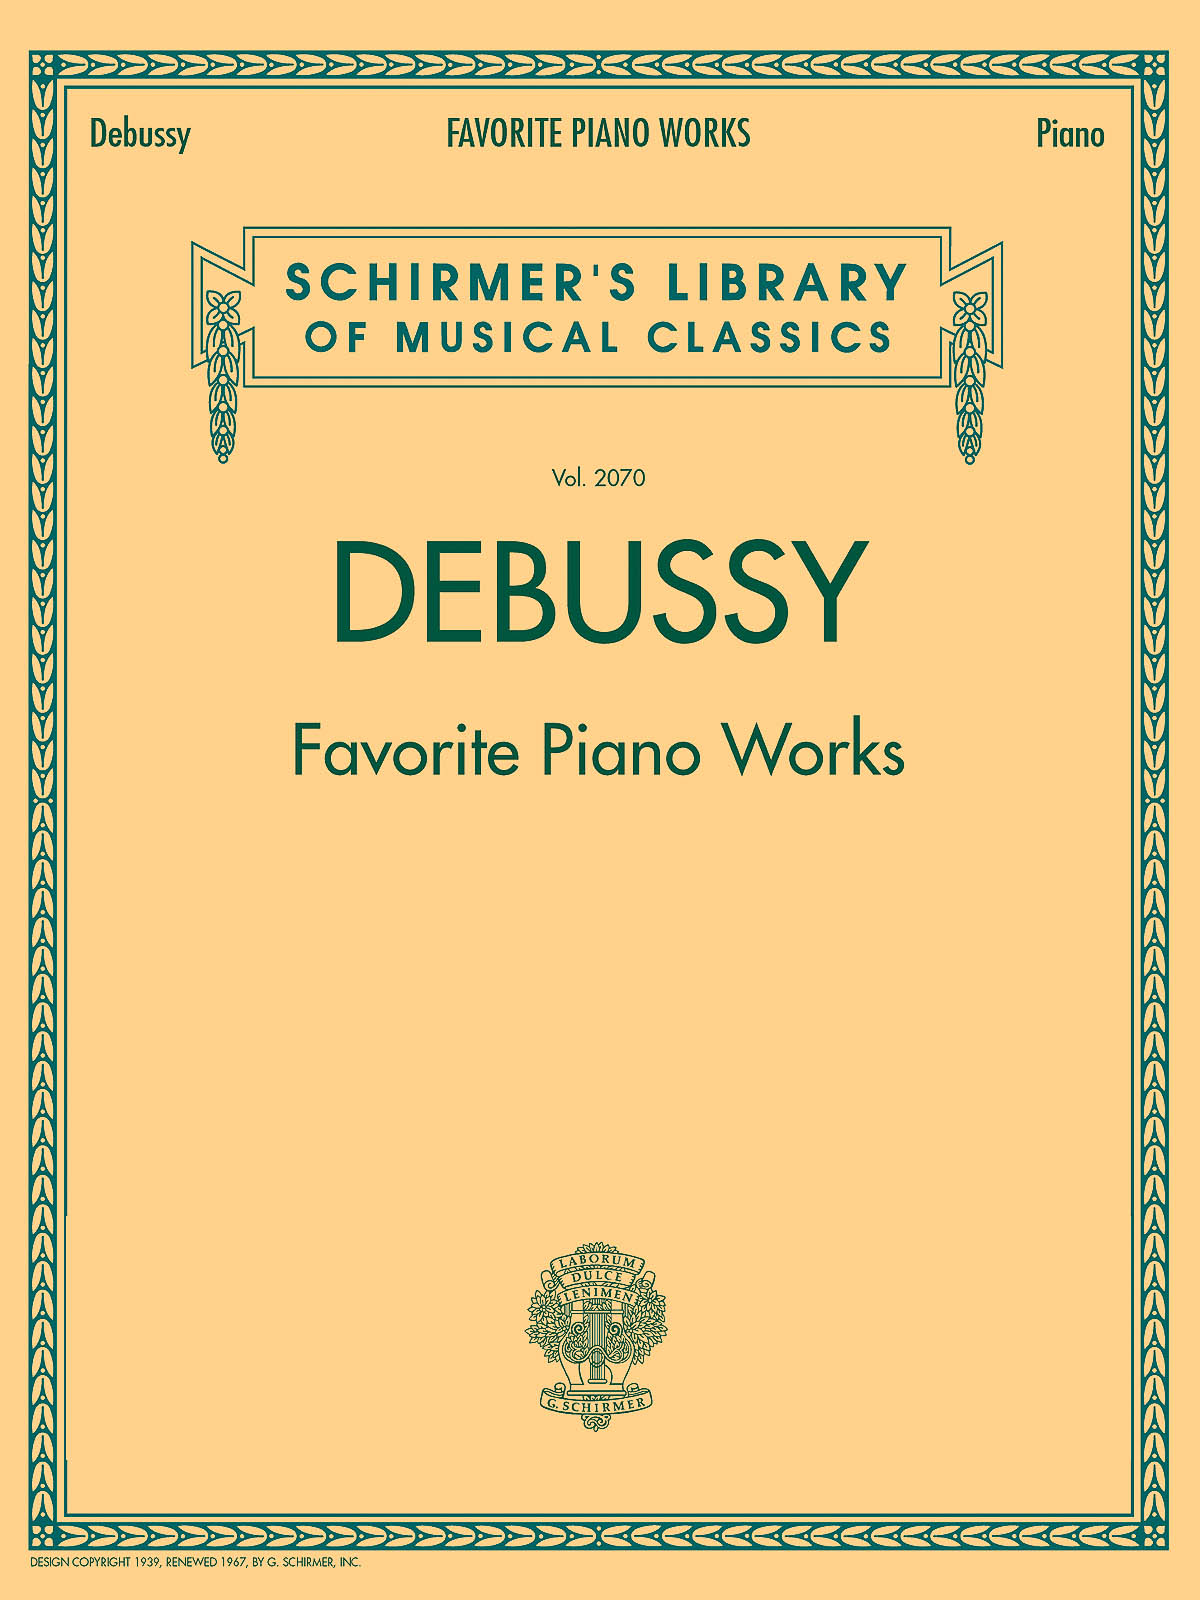 Claude Debussy: Debussy - Favorite Piano Works